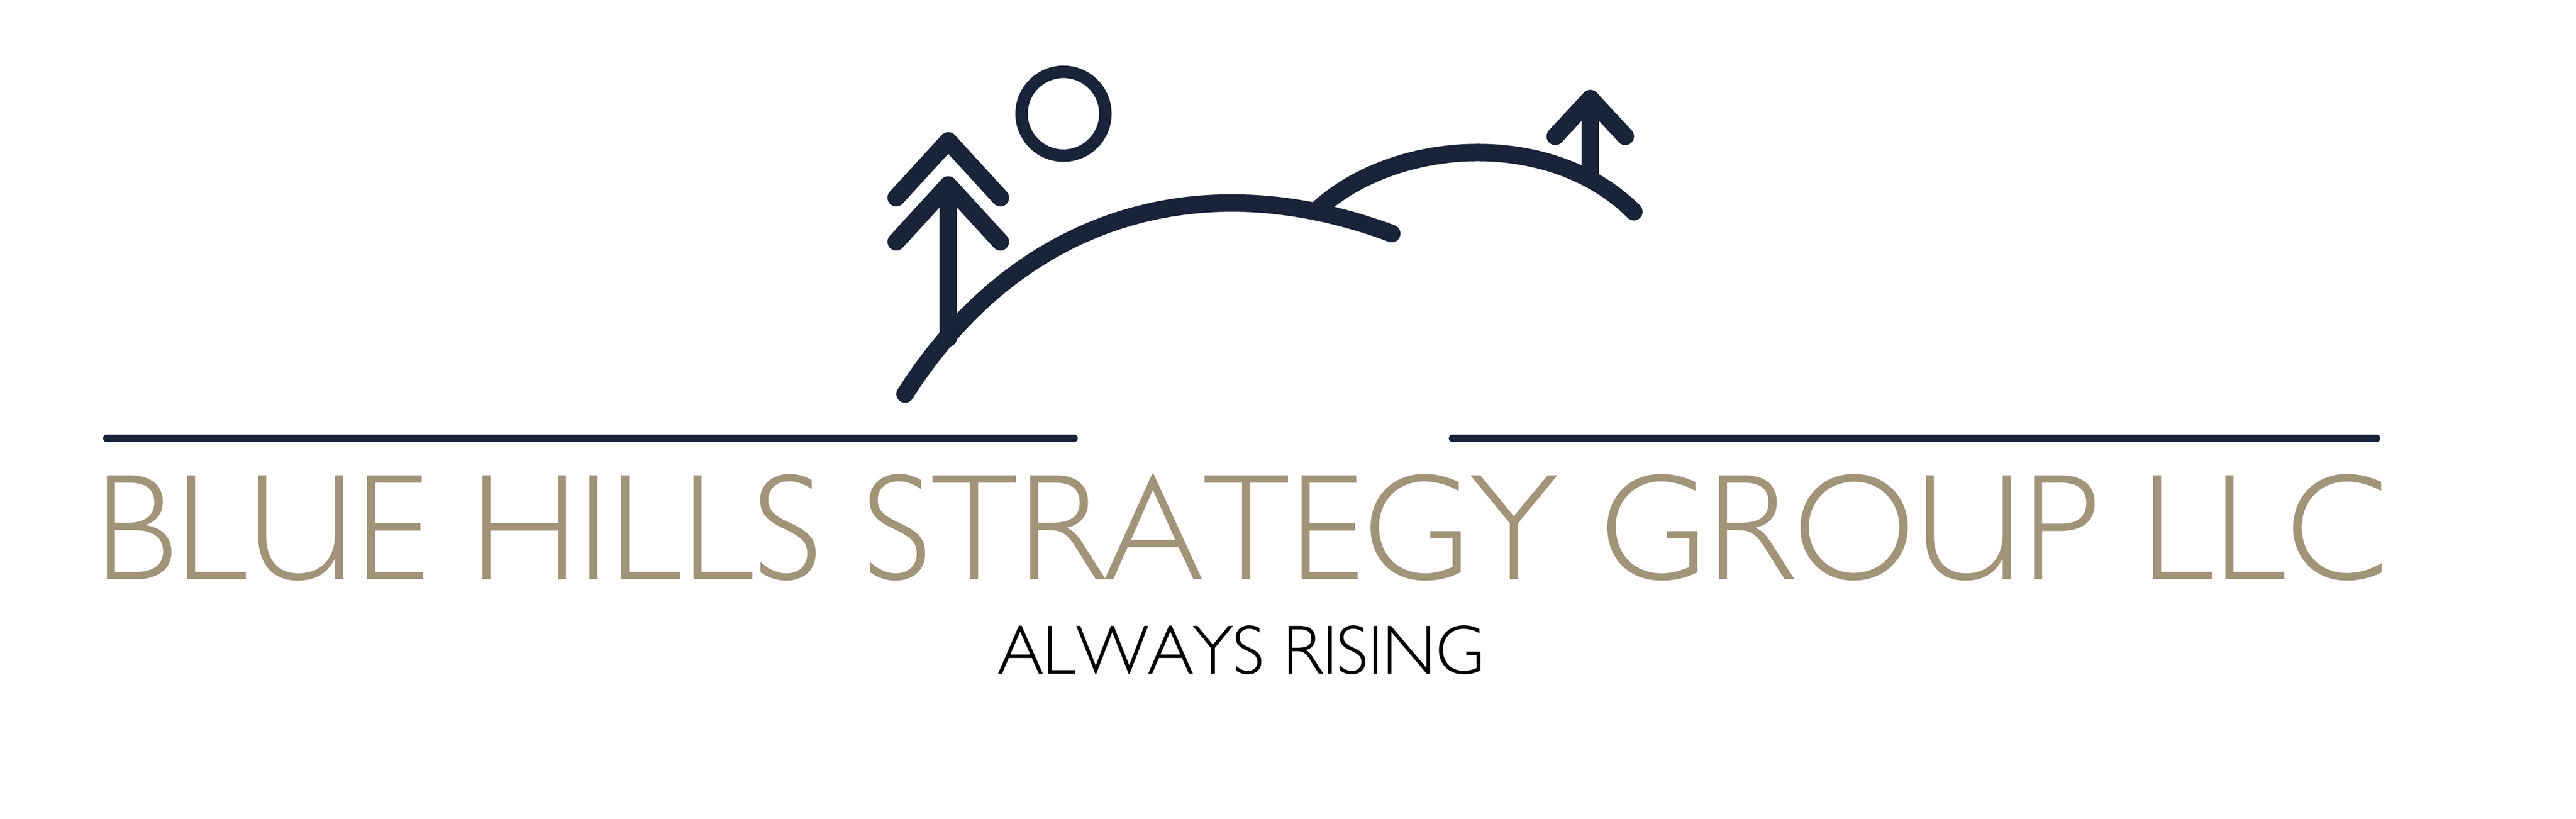 Blue Hills Strategy Group